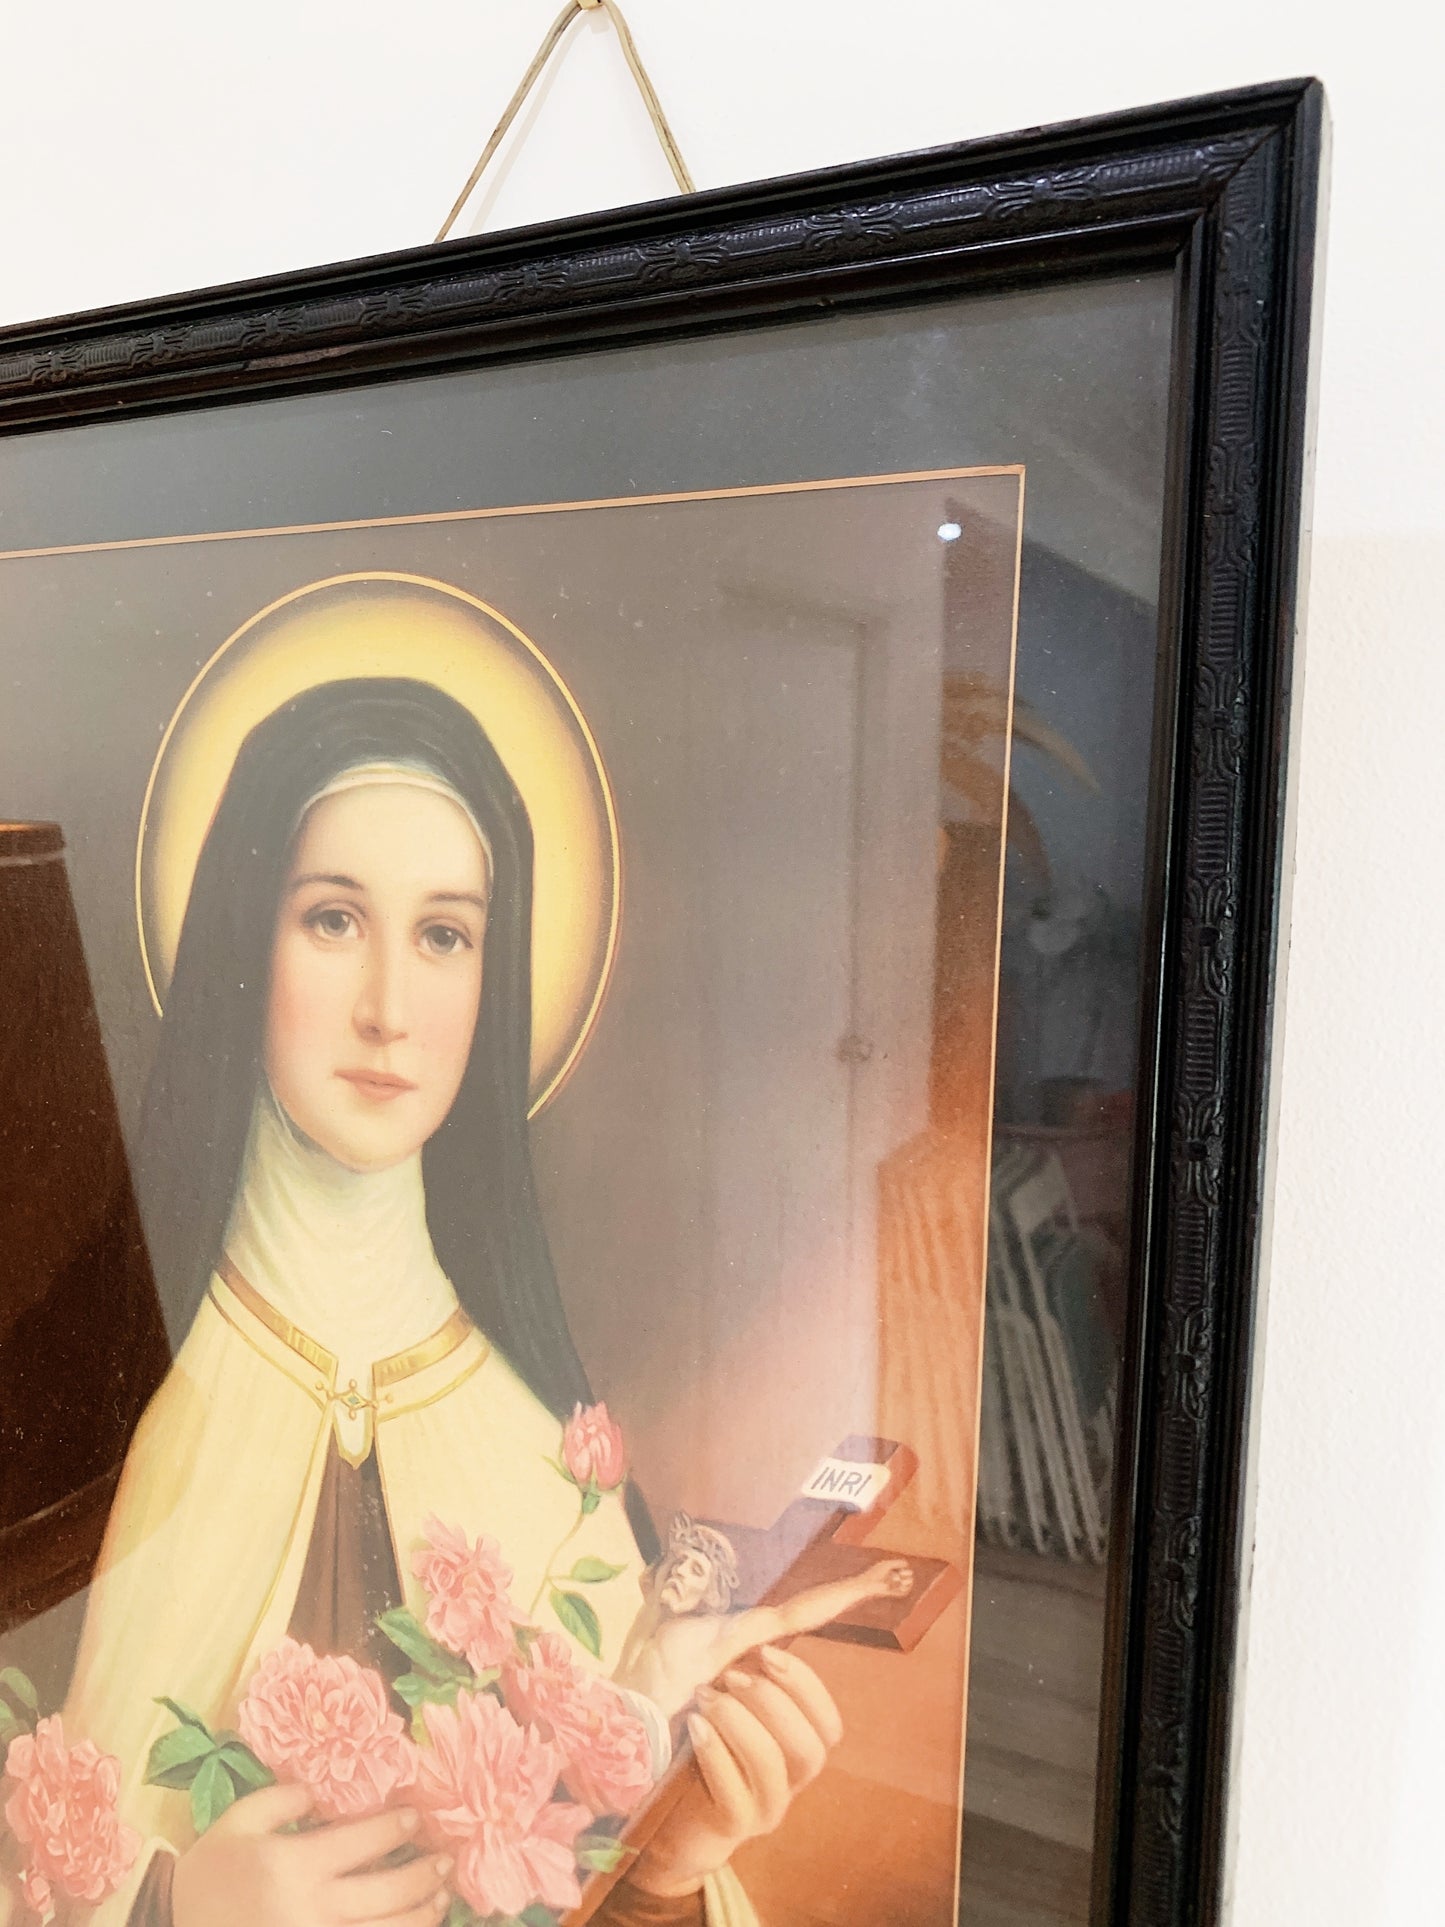 St Therese "The Little Flower" Print